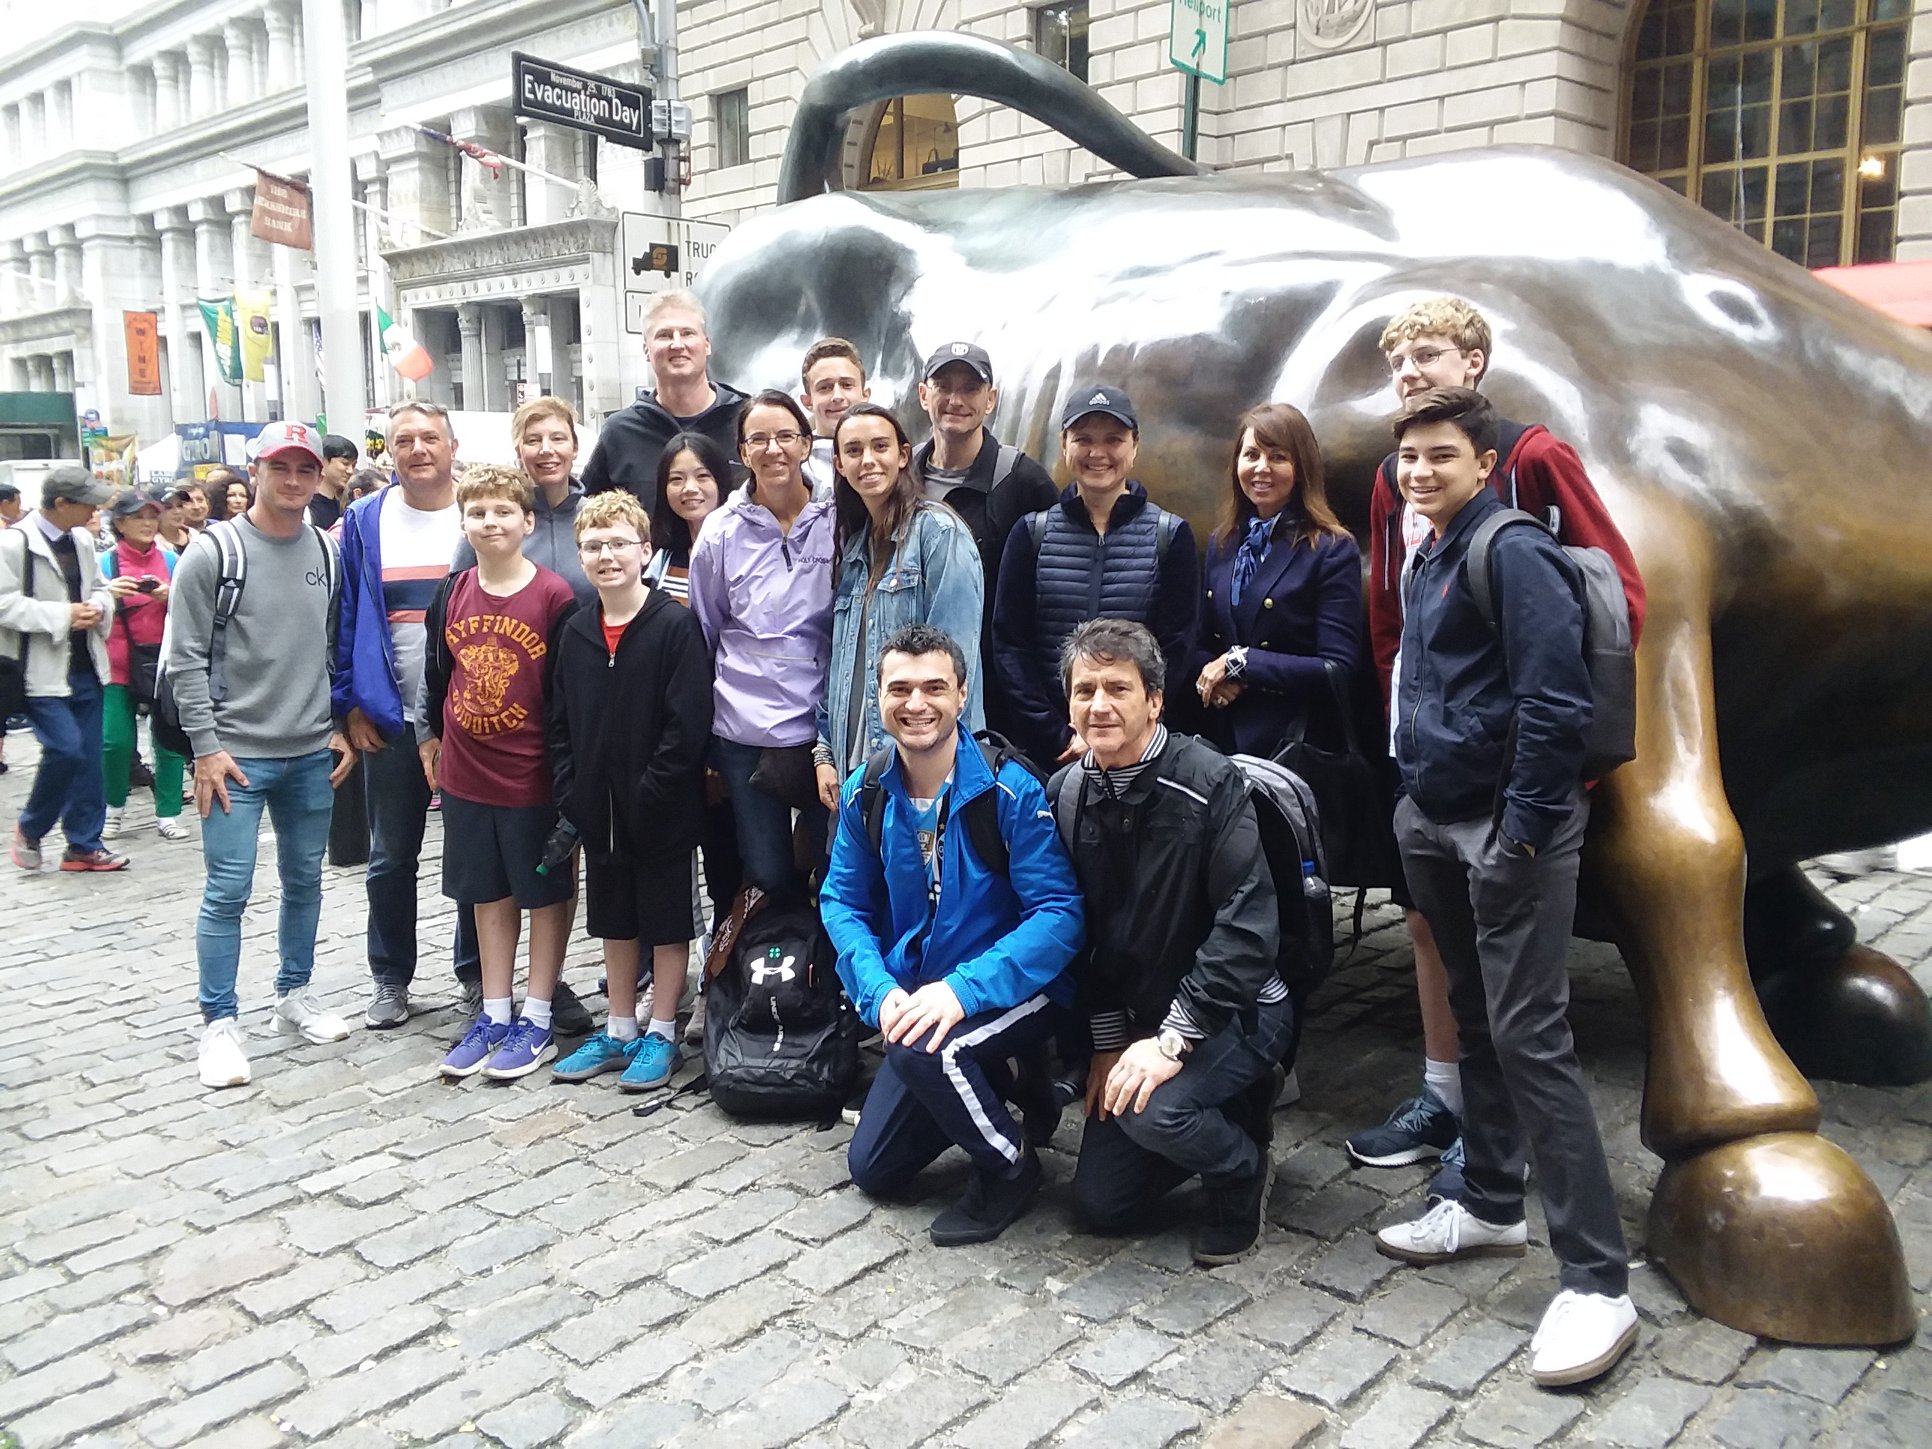 How to pose for a photo with the Charging Bull in NYC